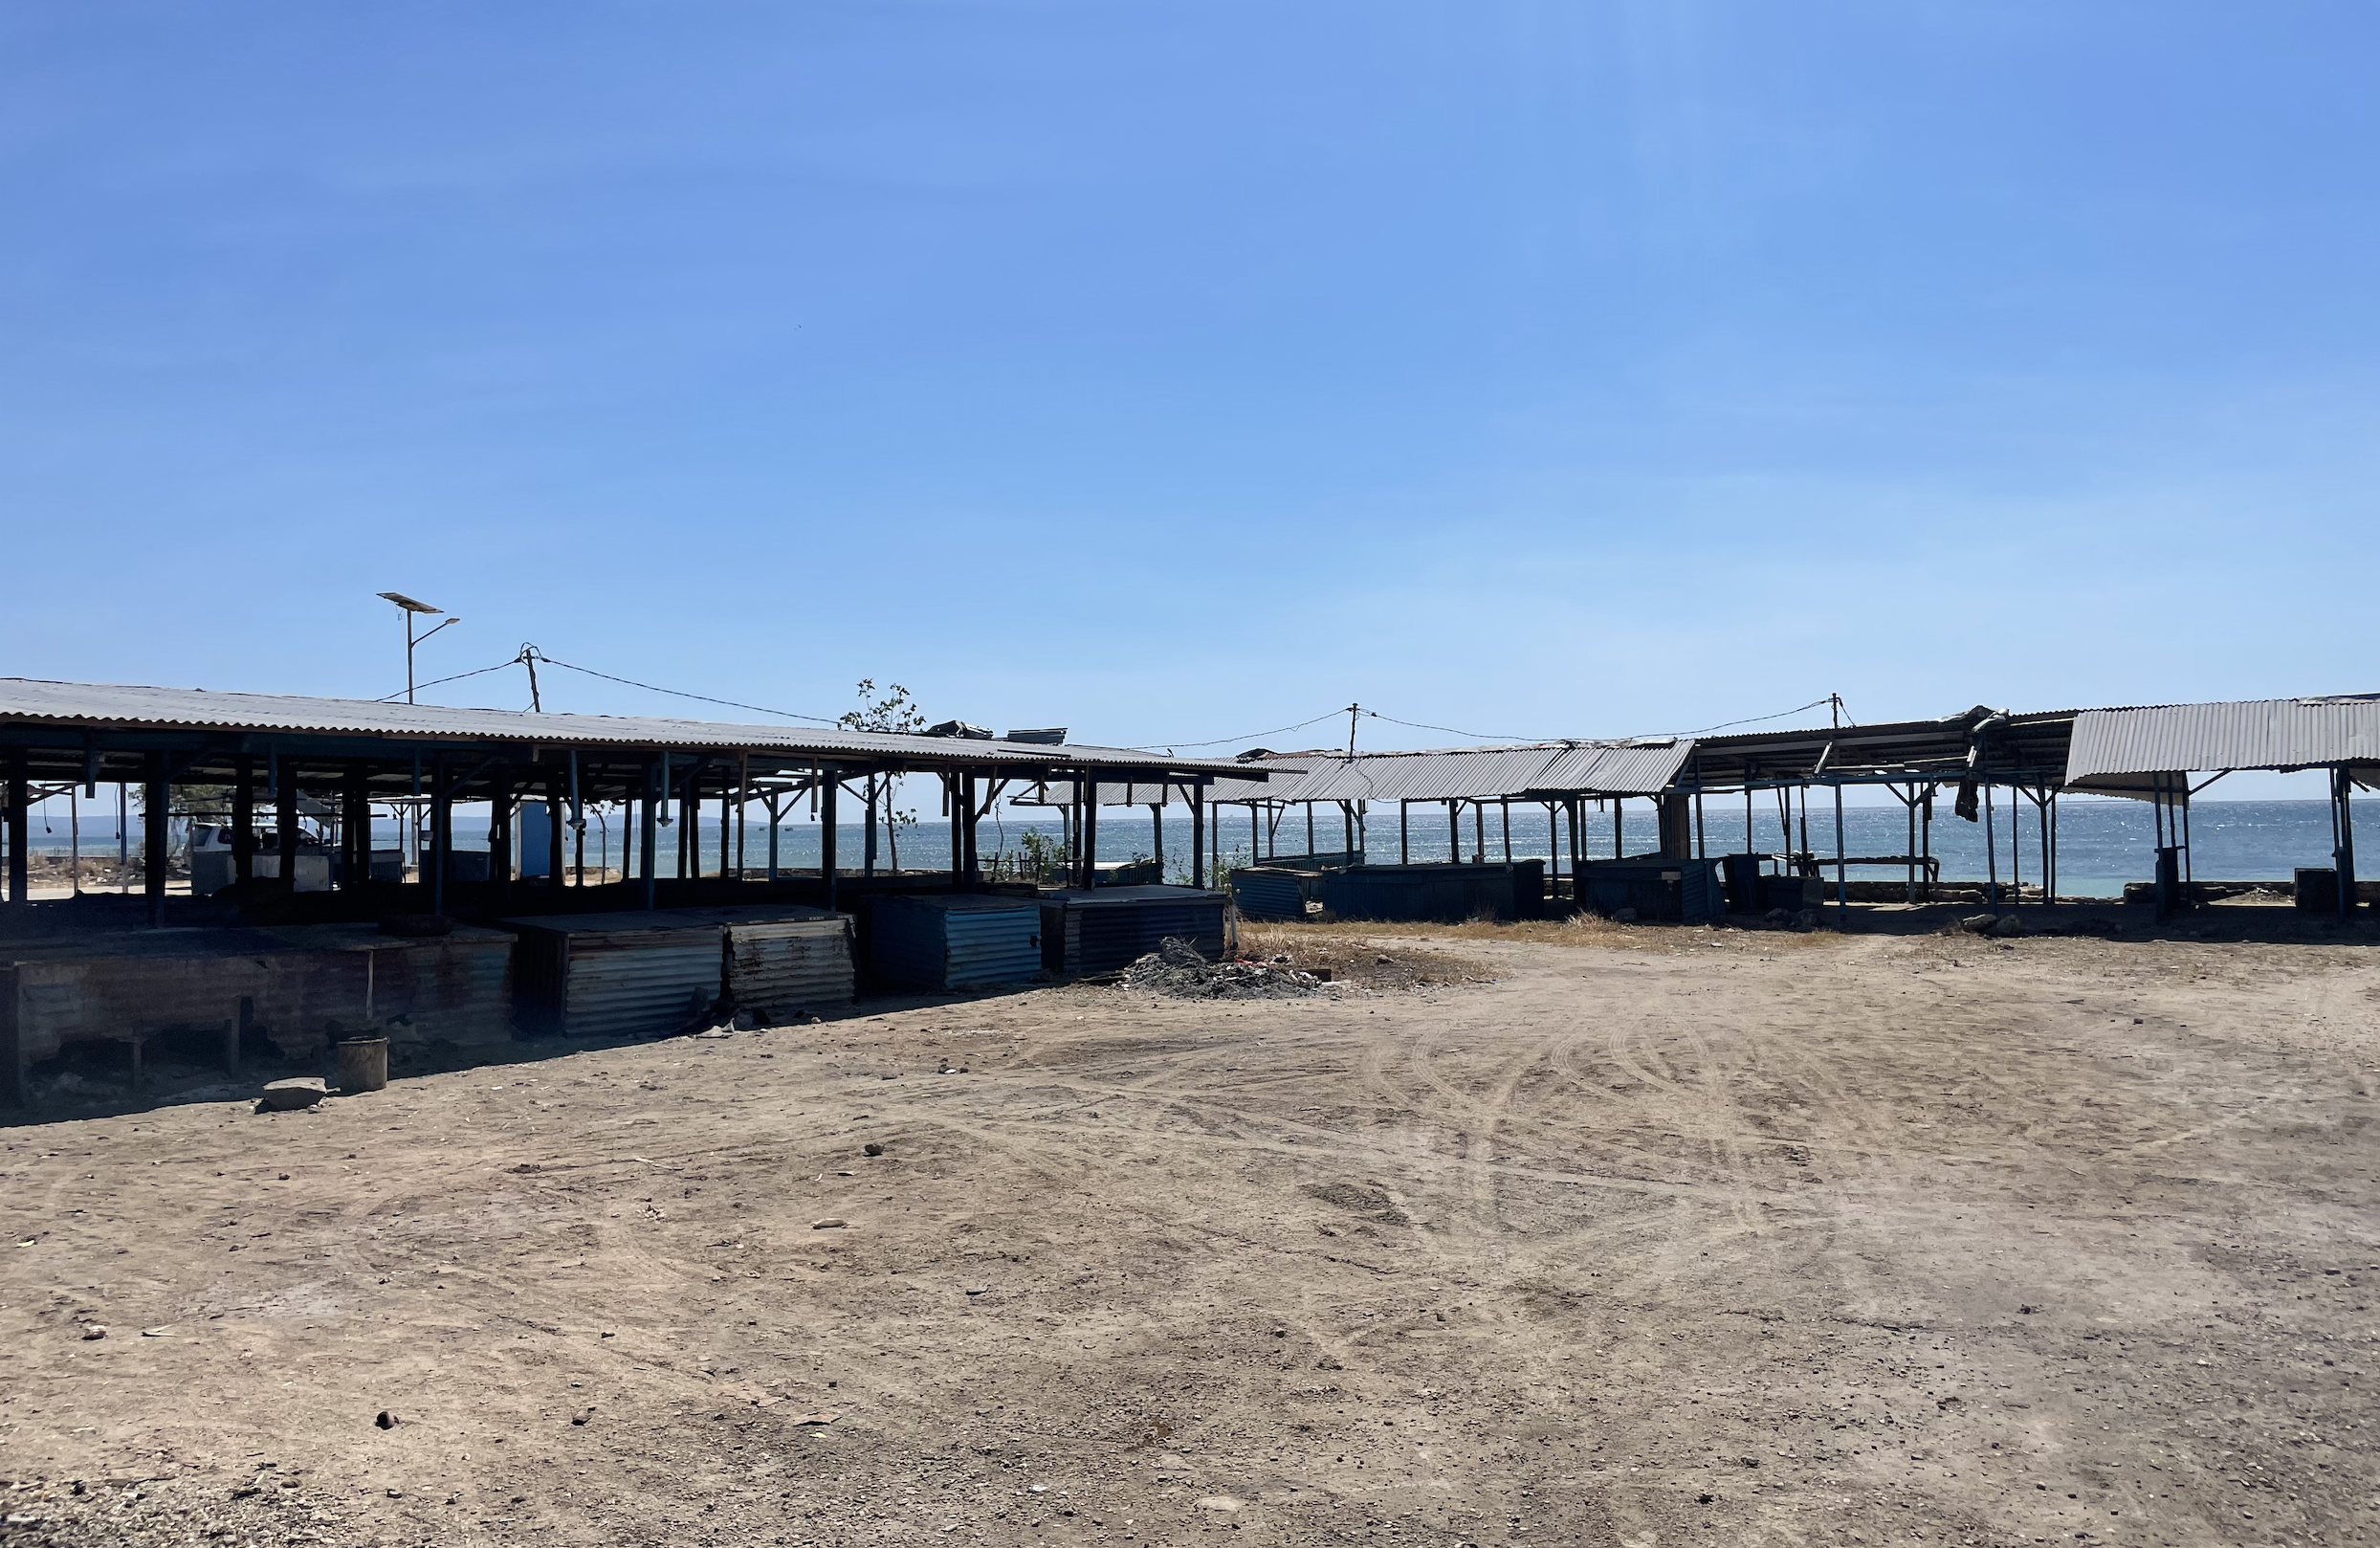 The site of Nur's market stall in Kupang, Indonesia